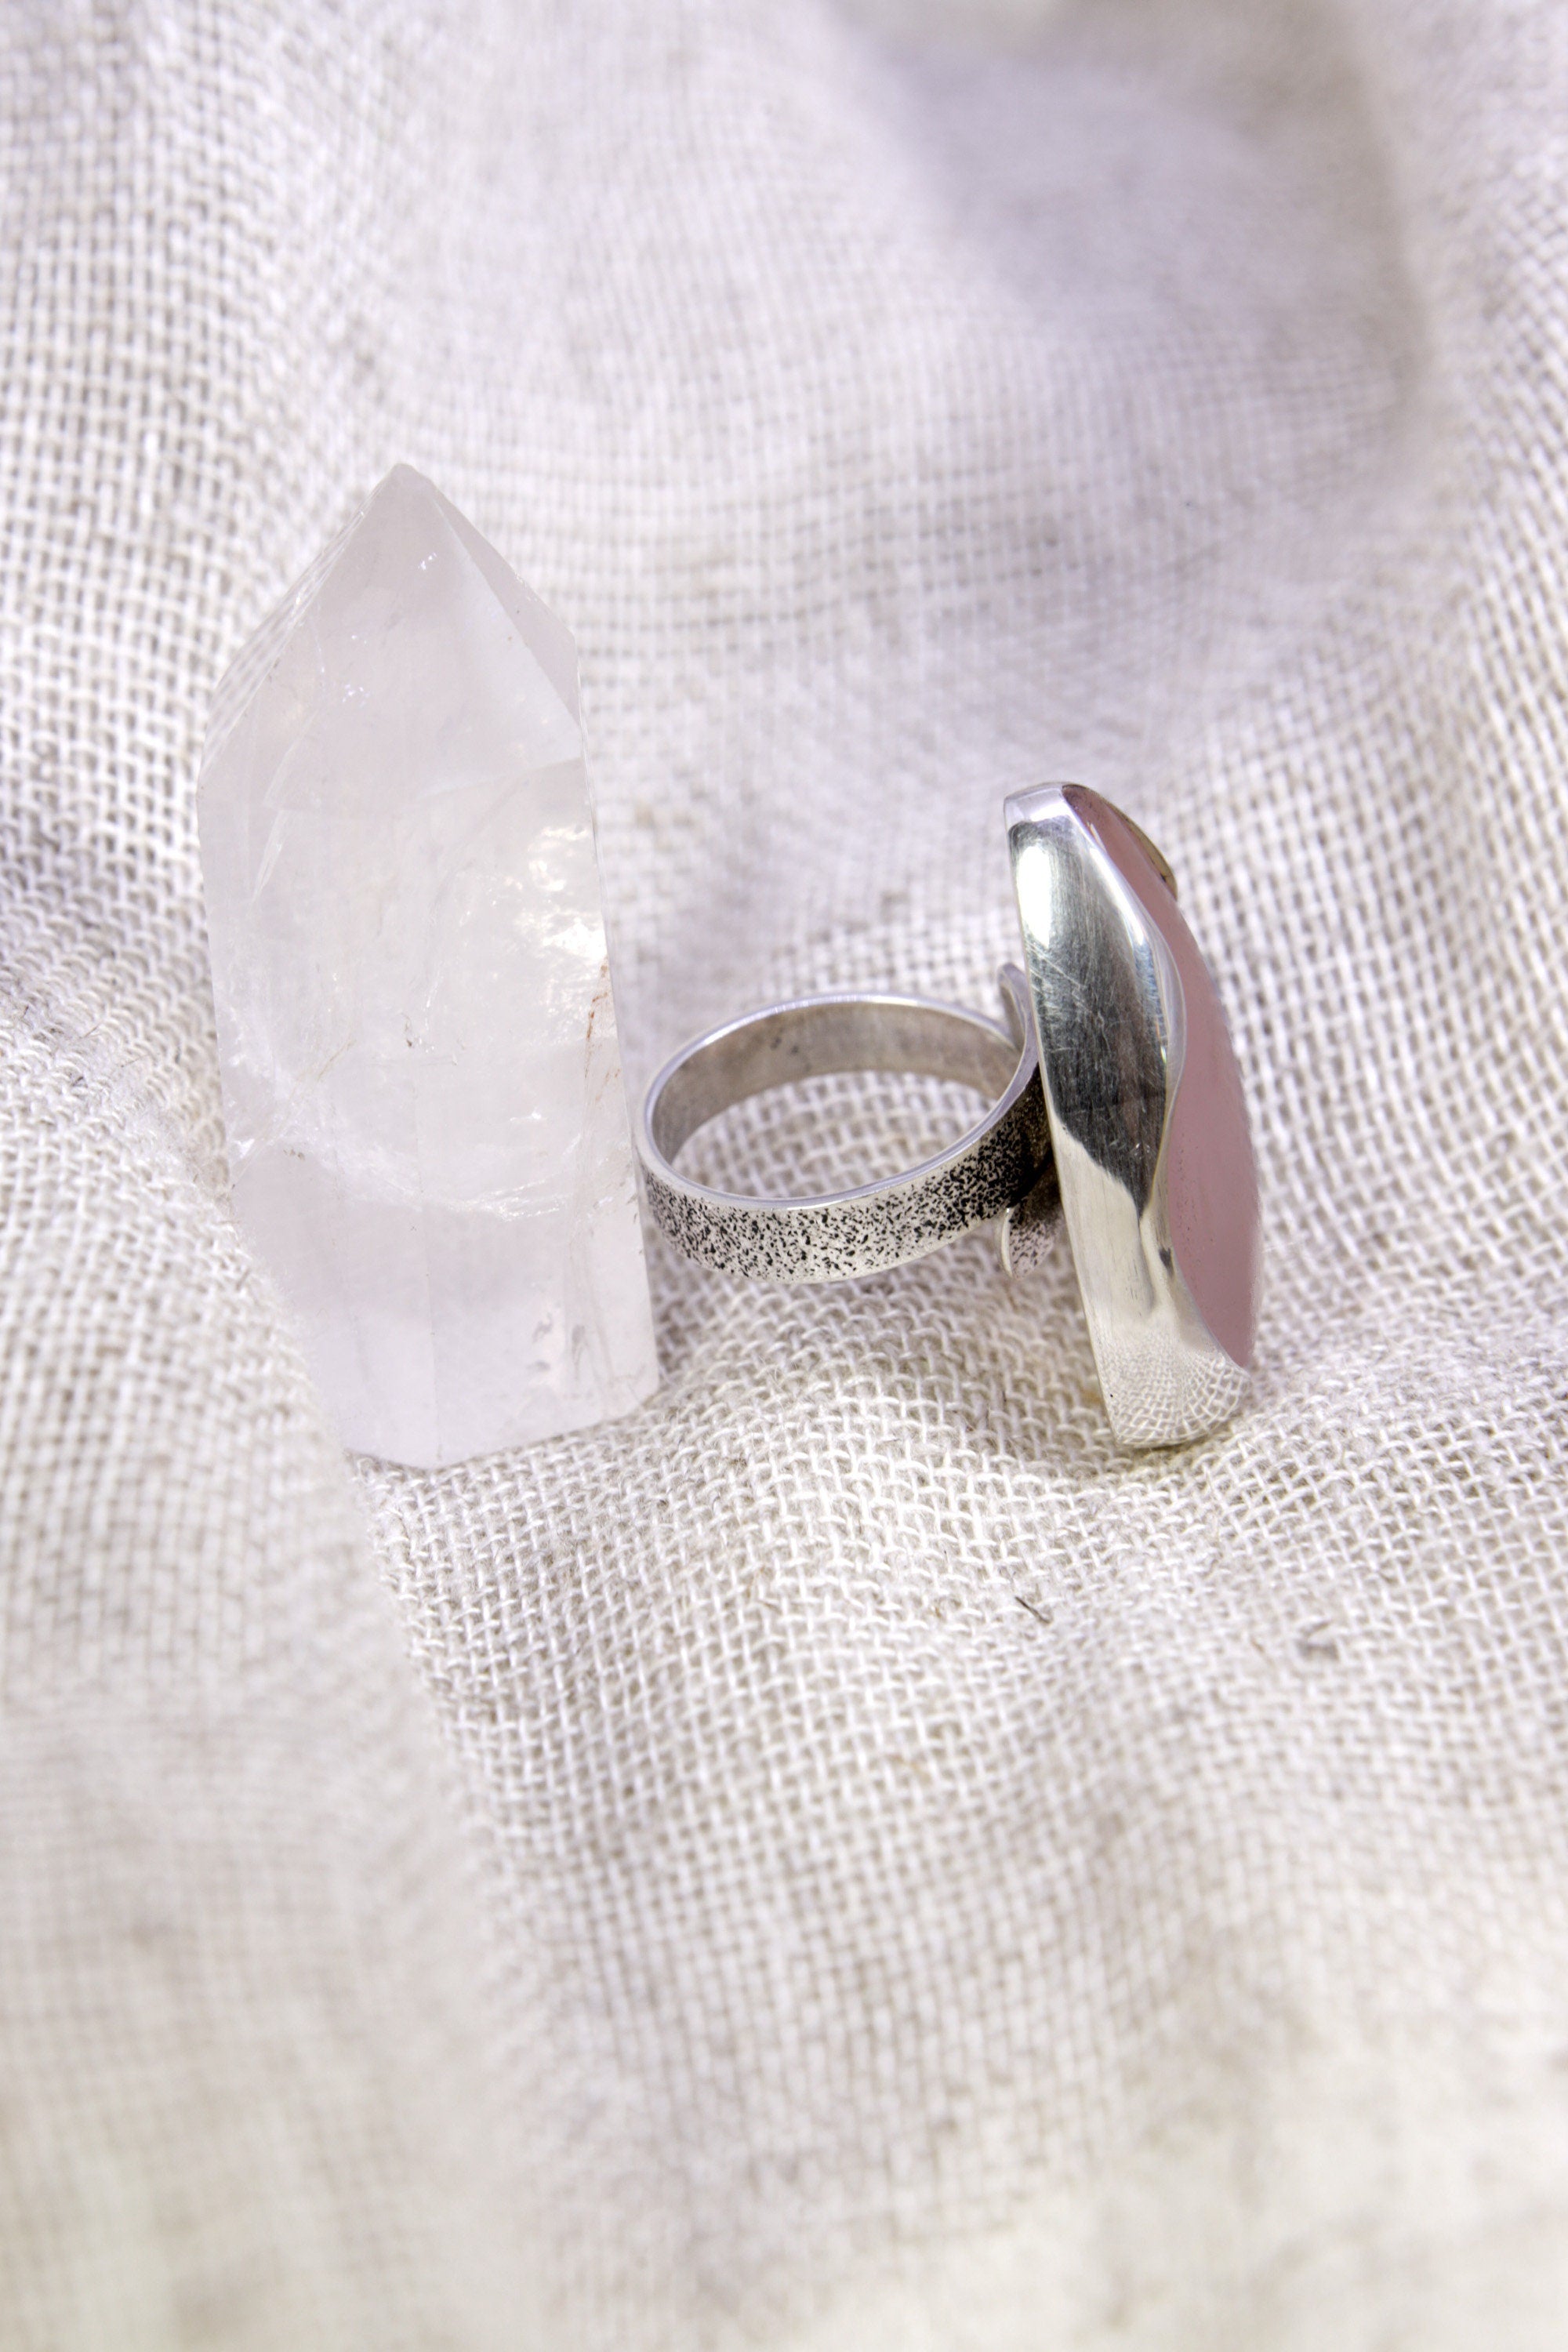 A Robust Embrace of Gentle Harmony: Adjustable Sterling Silver Ring with Triangular Rose Quartz - Unisex - Size 5-12 US